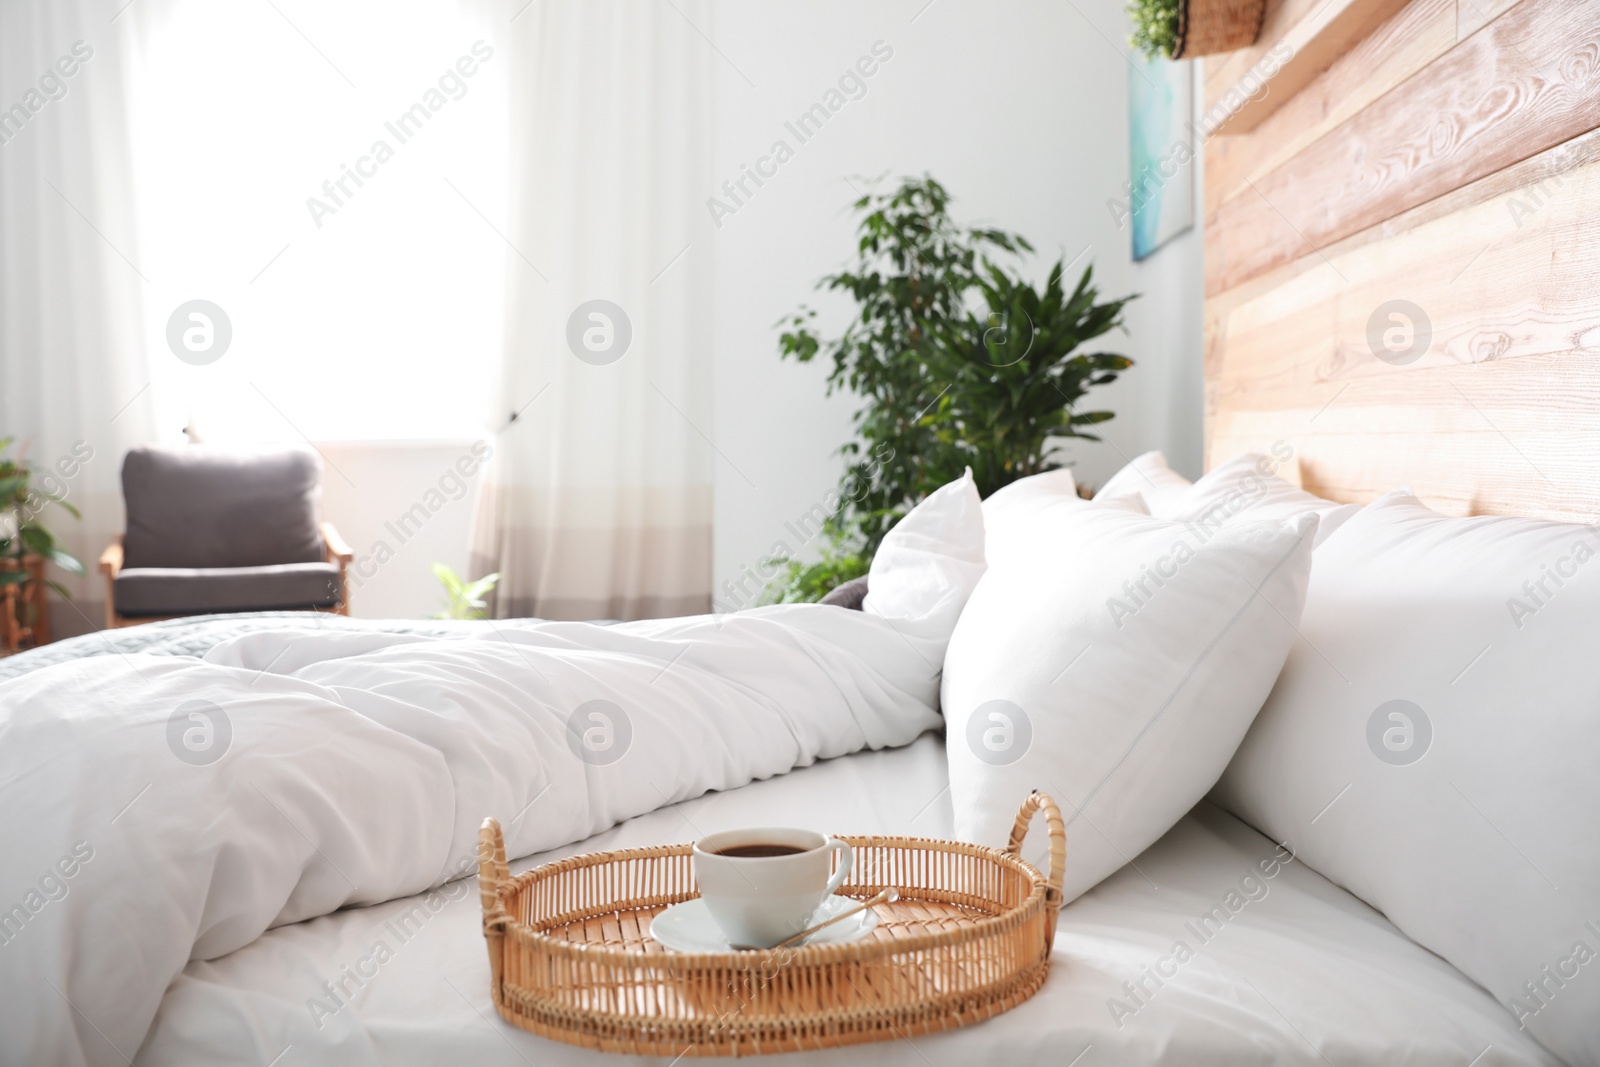 Photo of Cup of coffee on bed in room decorated with green plants. Home design ideas